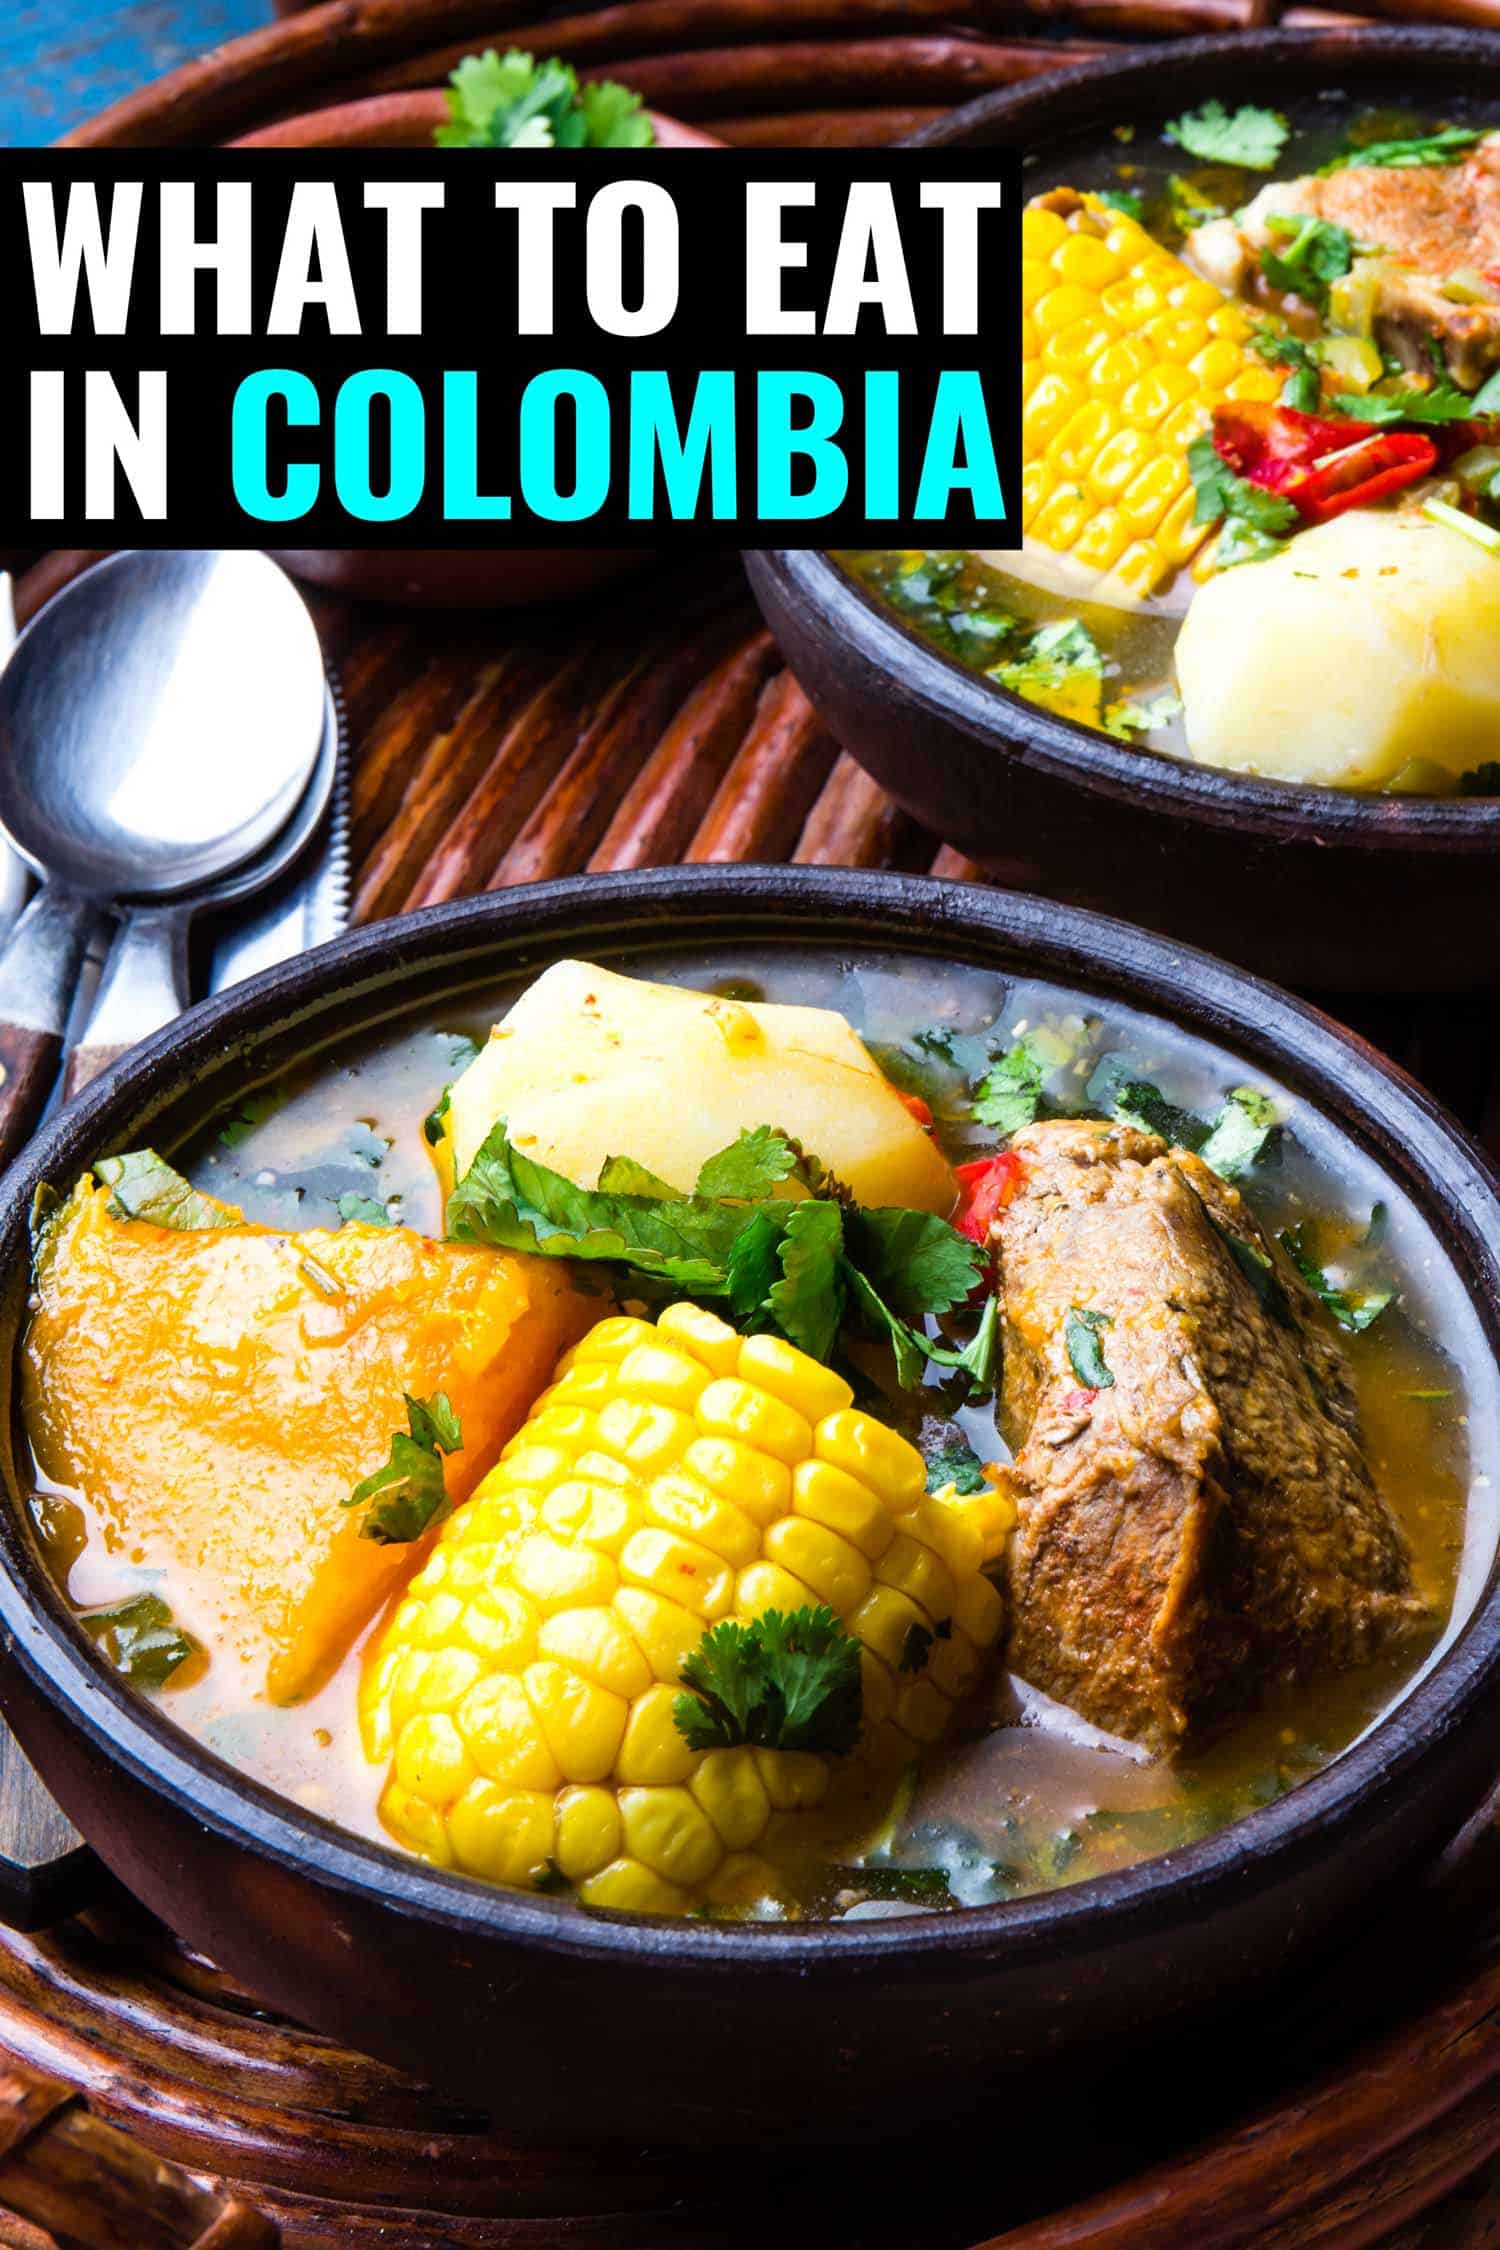 Bowl of ajiaco a traditional Colombian soup